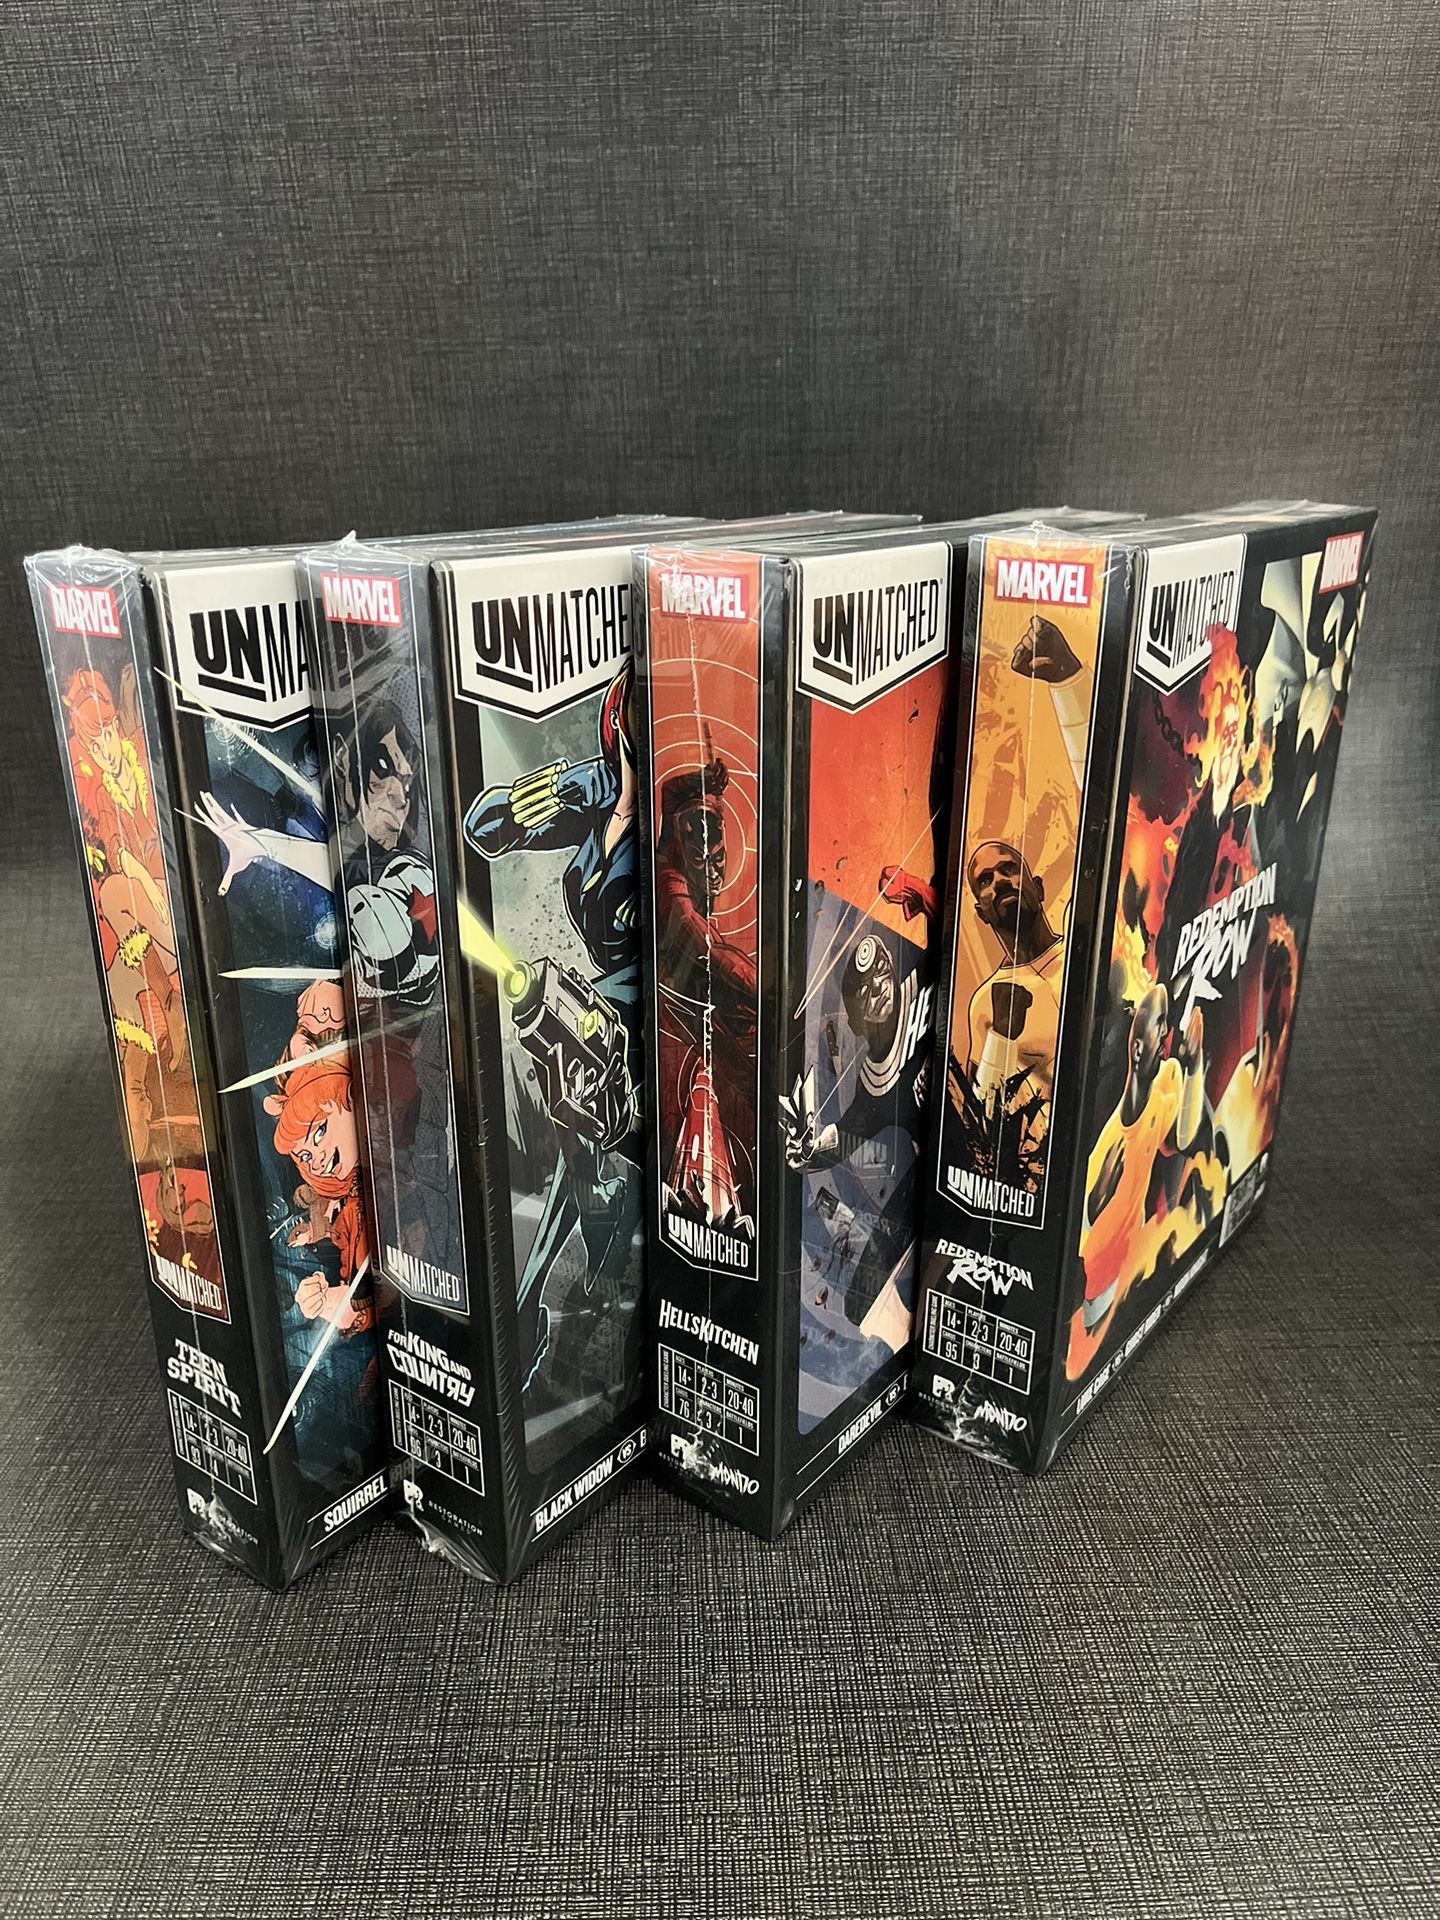 Unmatched: Marvel 4-Box Bundle - An Asymmetrical Miniature Fighting Game For 2-4